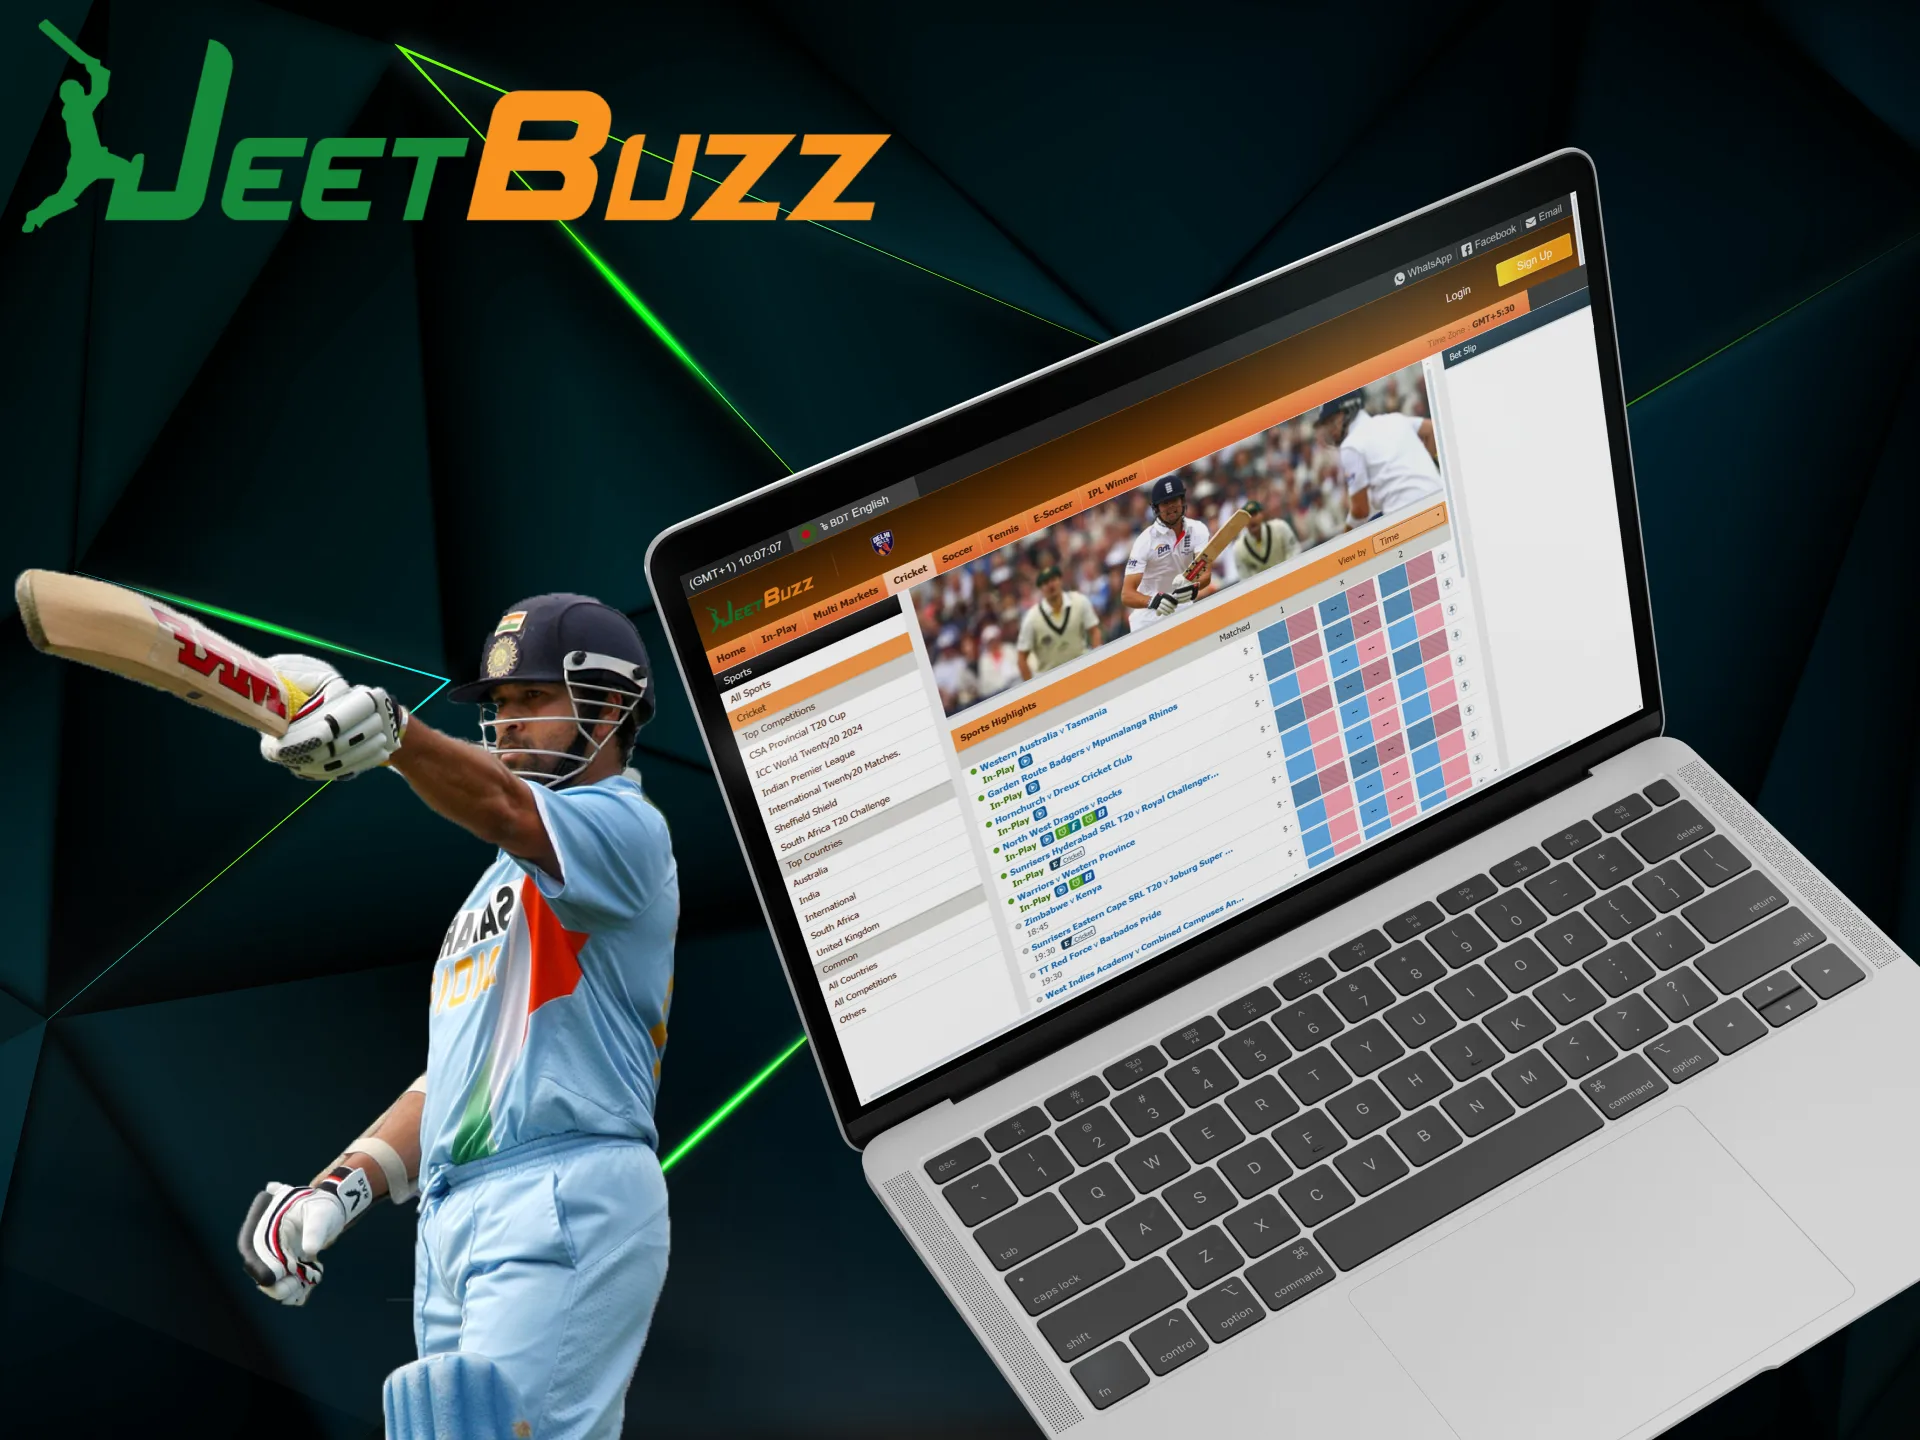 Register your account at JeetBuzz to bet on cricket.